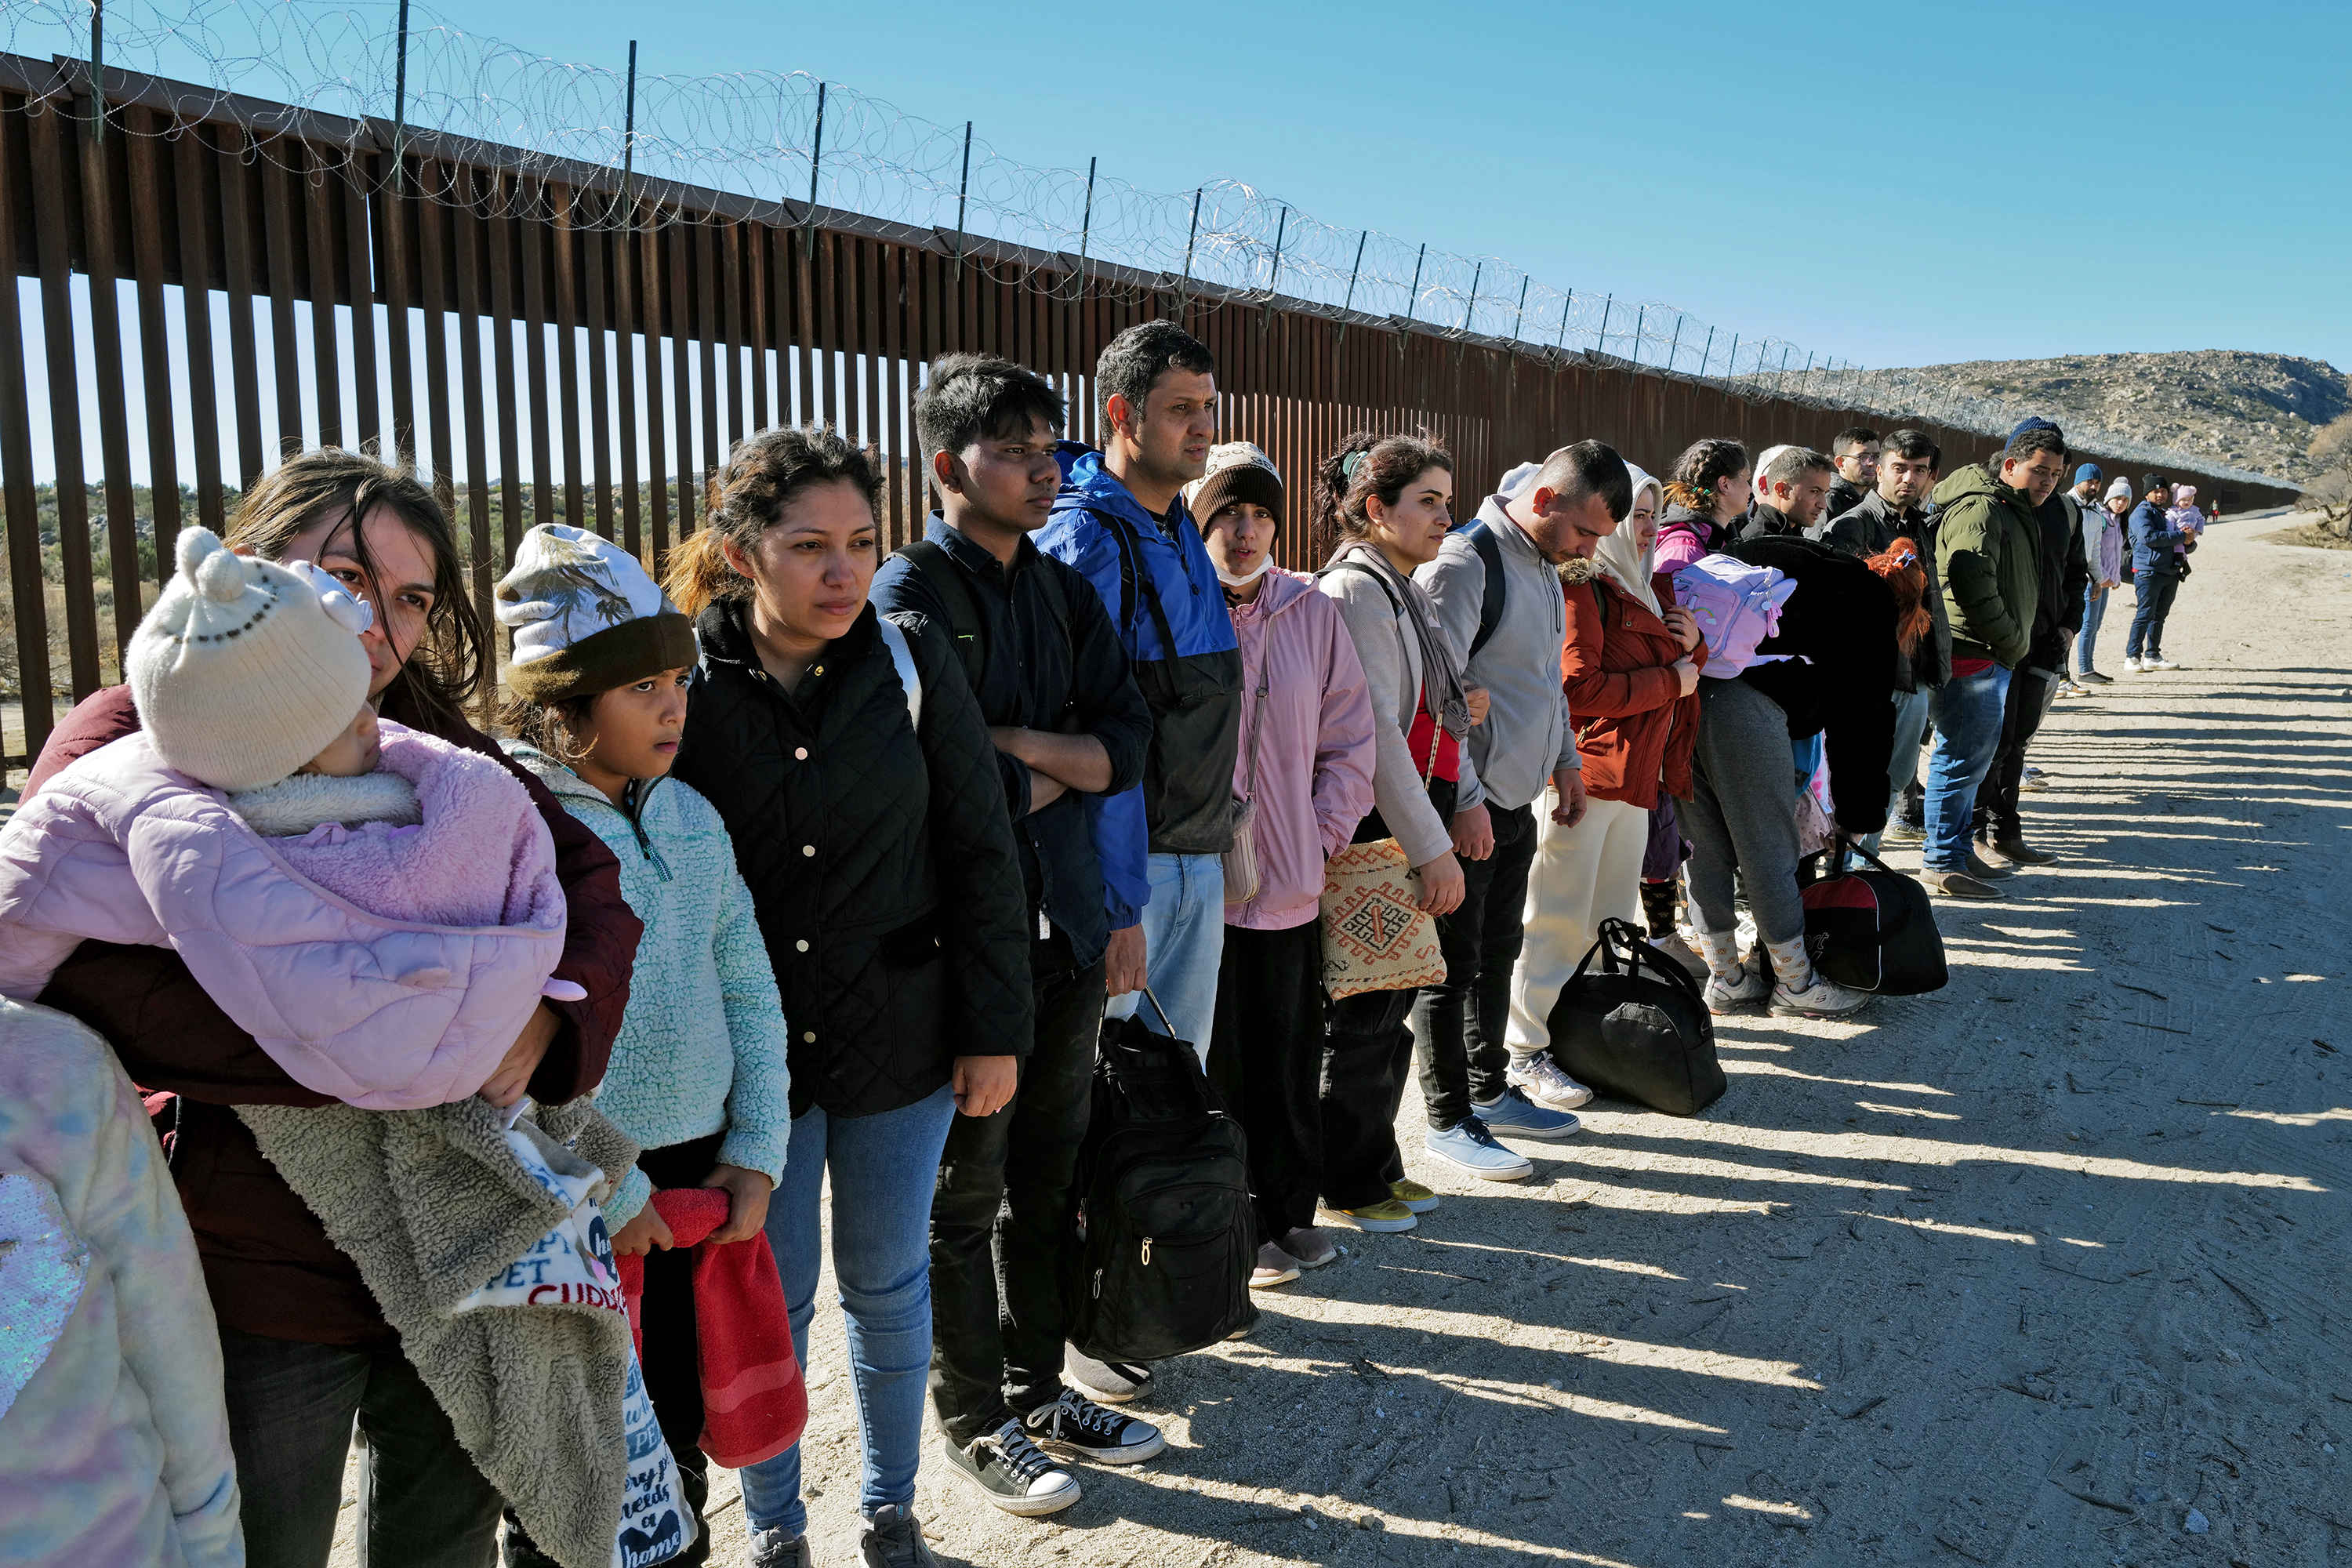 Men, women, children, and babies stand in a line before a tall fence, some with bags at their feet.